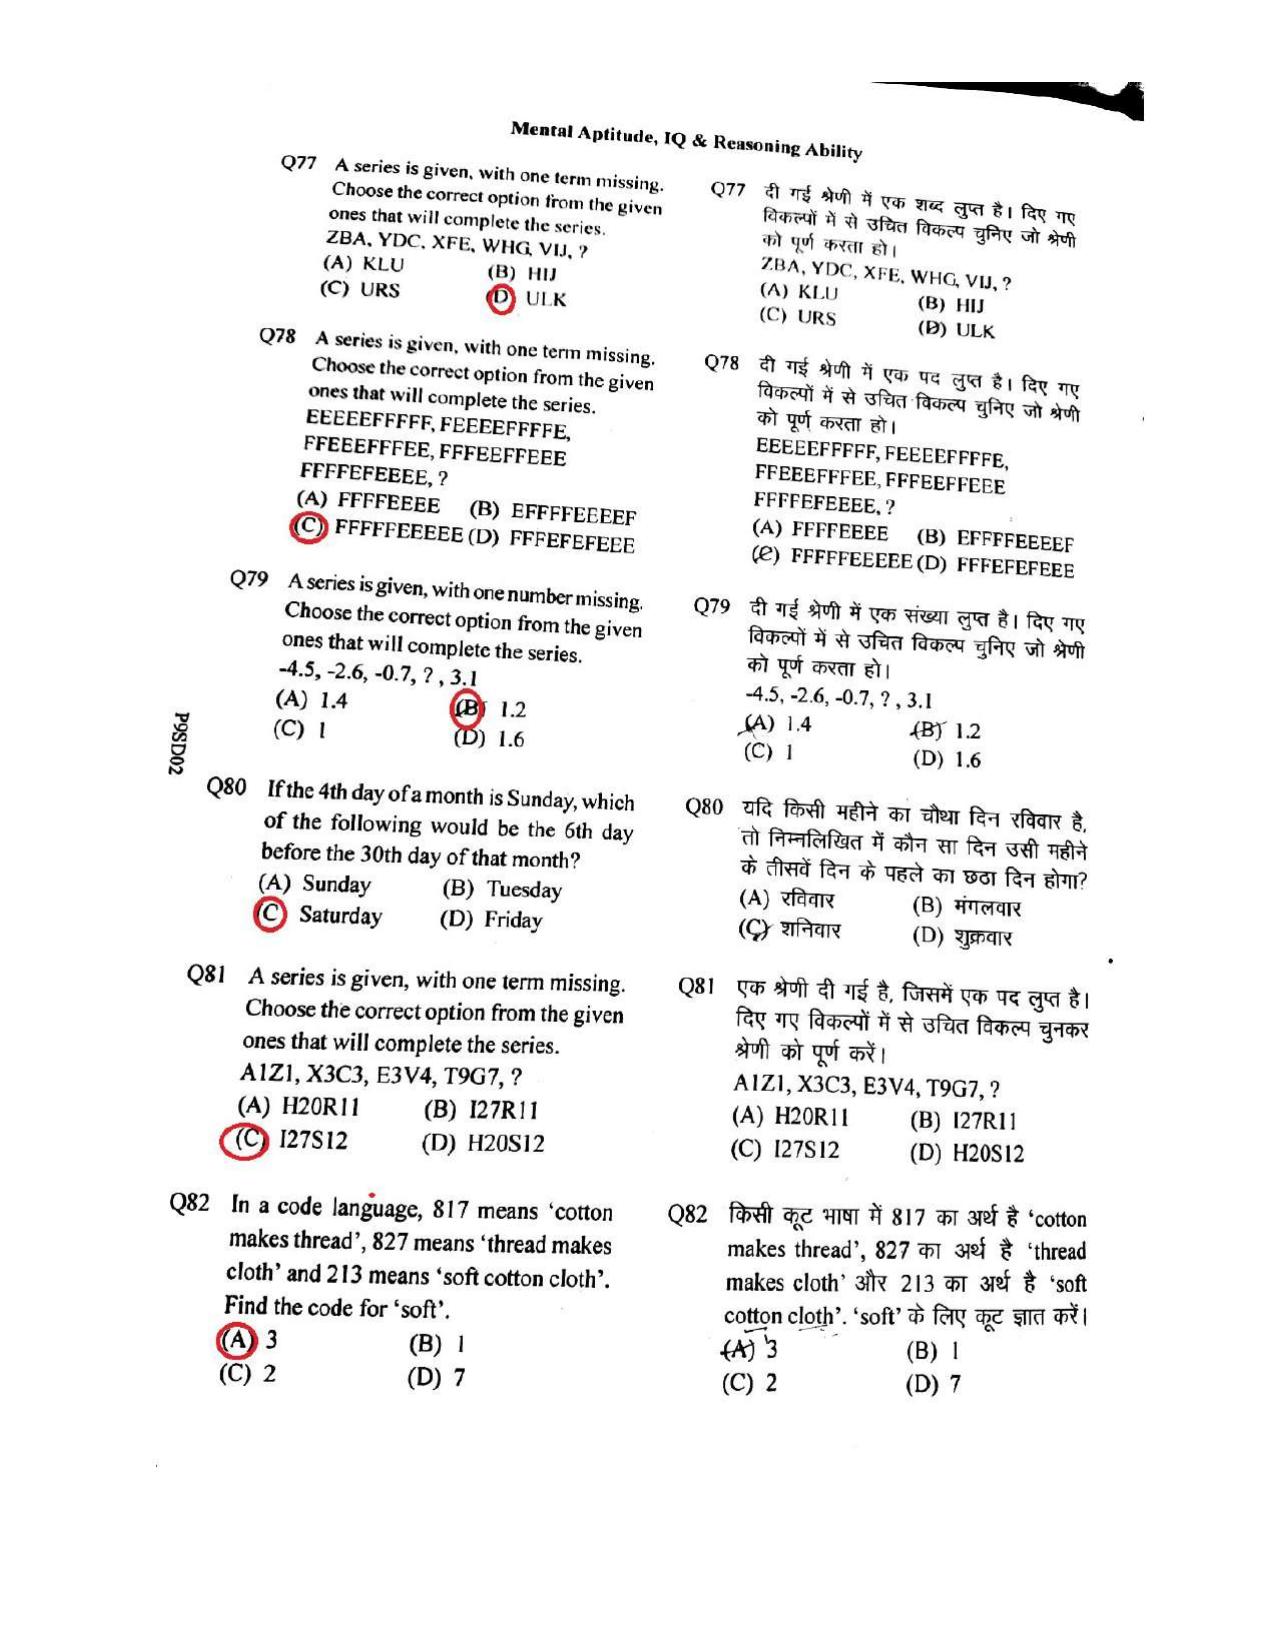 UPPRPB Police Constable Question Papers Jan 27, 2019 - Page 18